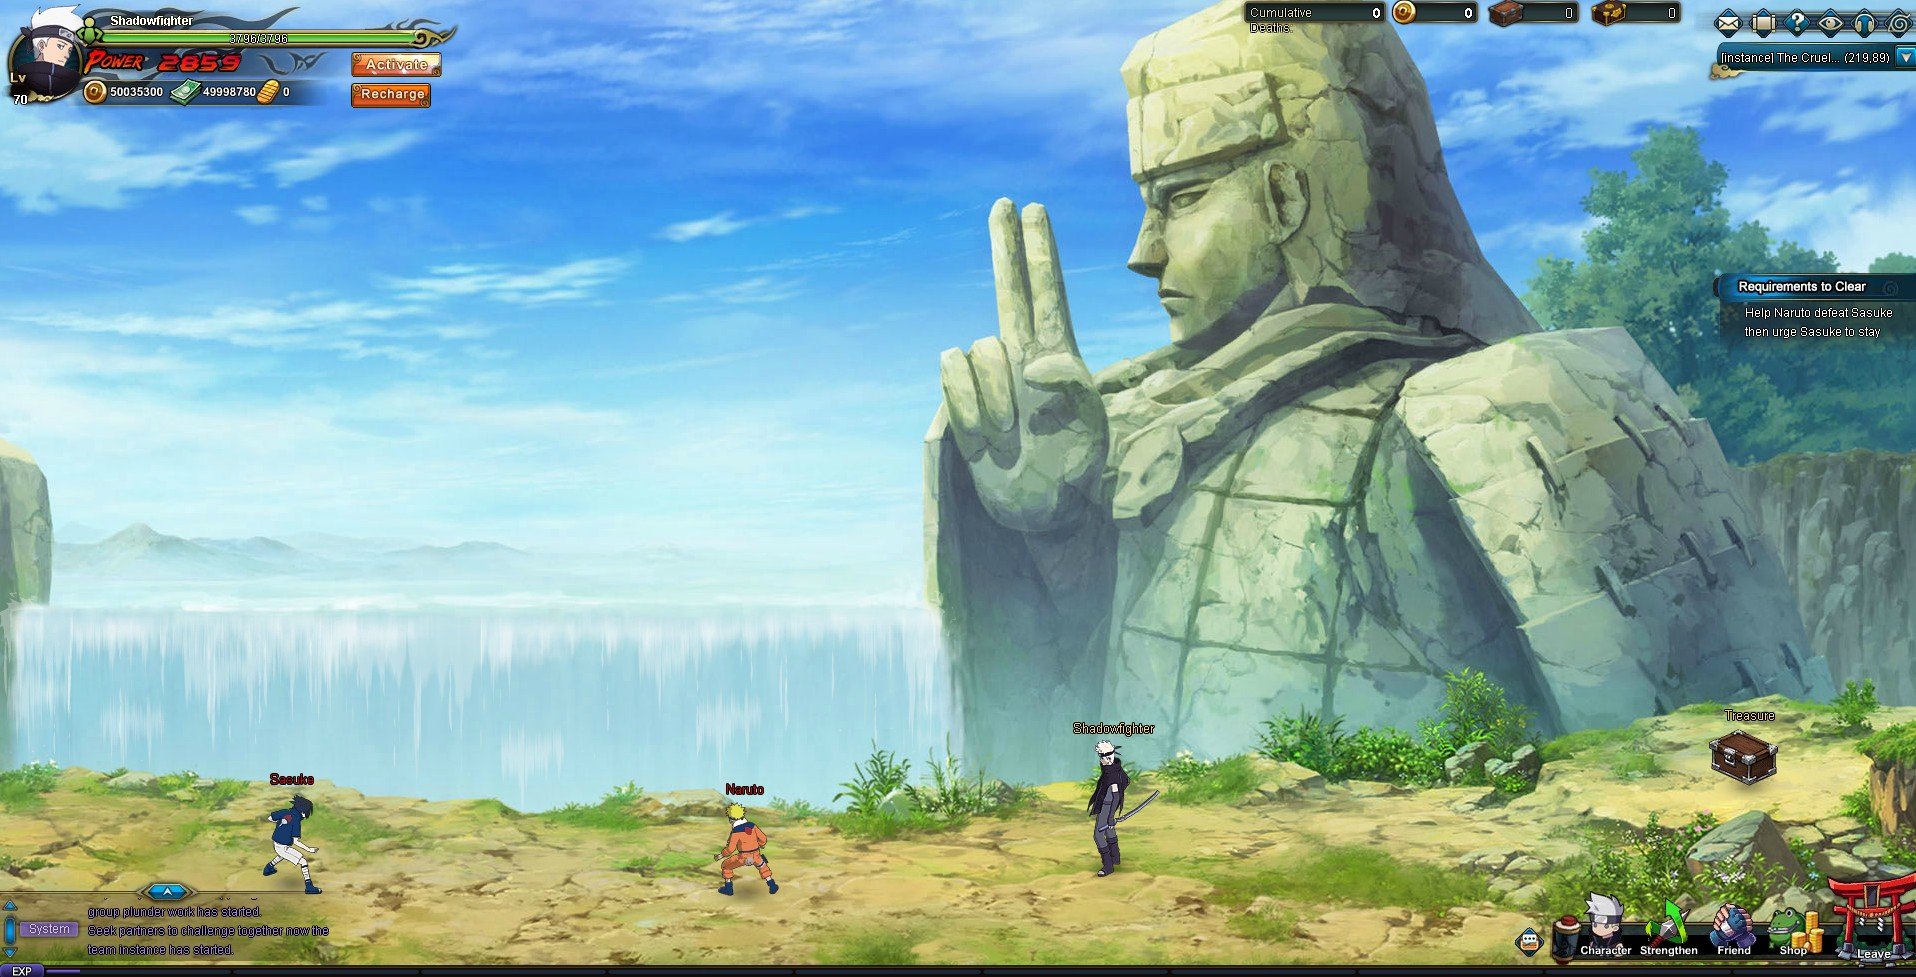 Official Naruto MMORPG Game